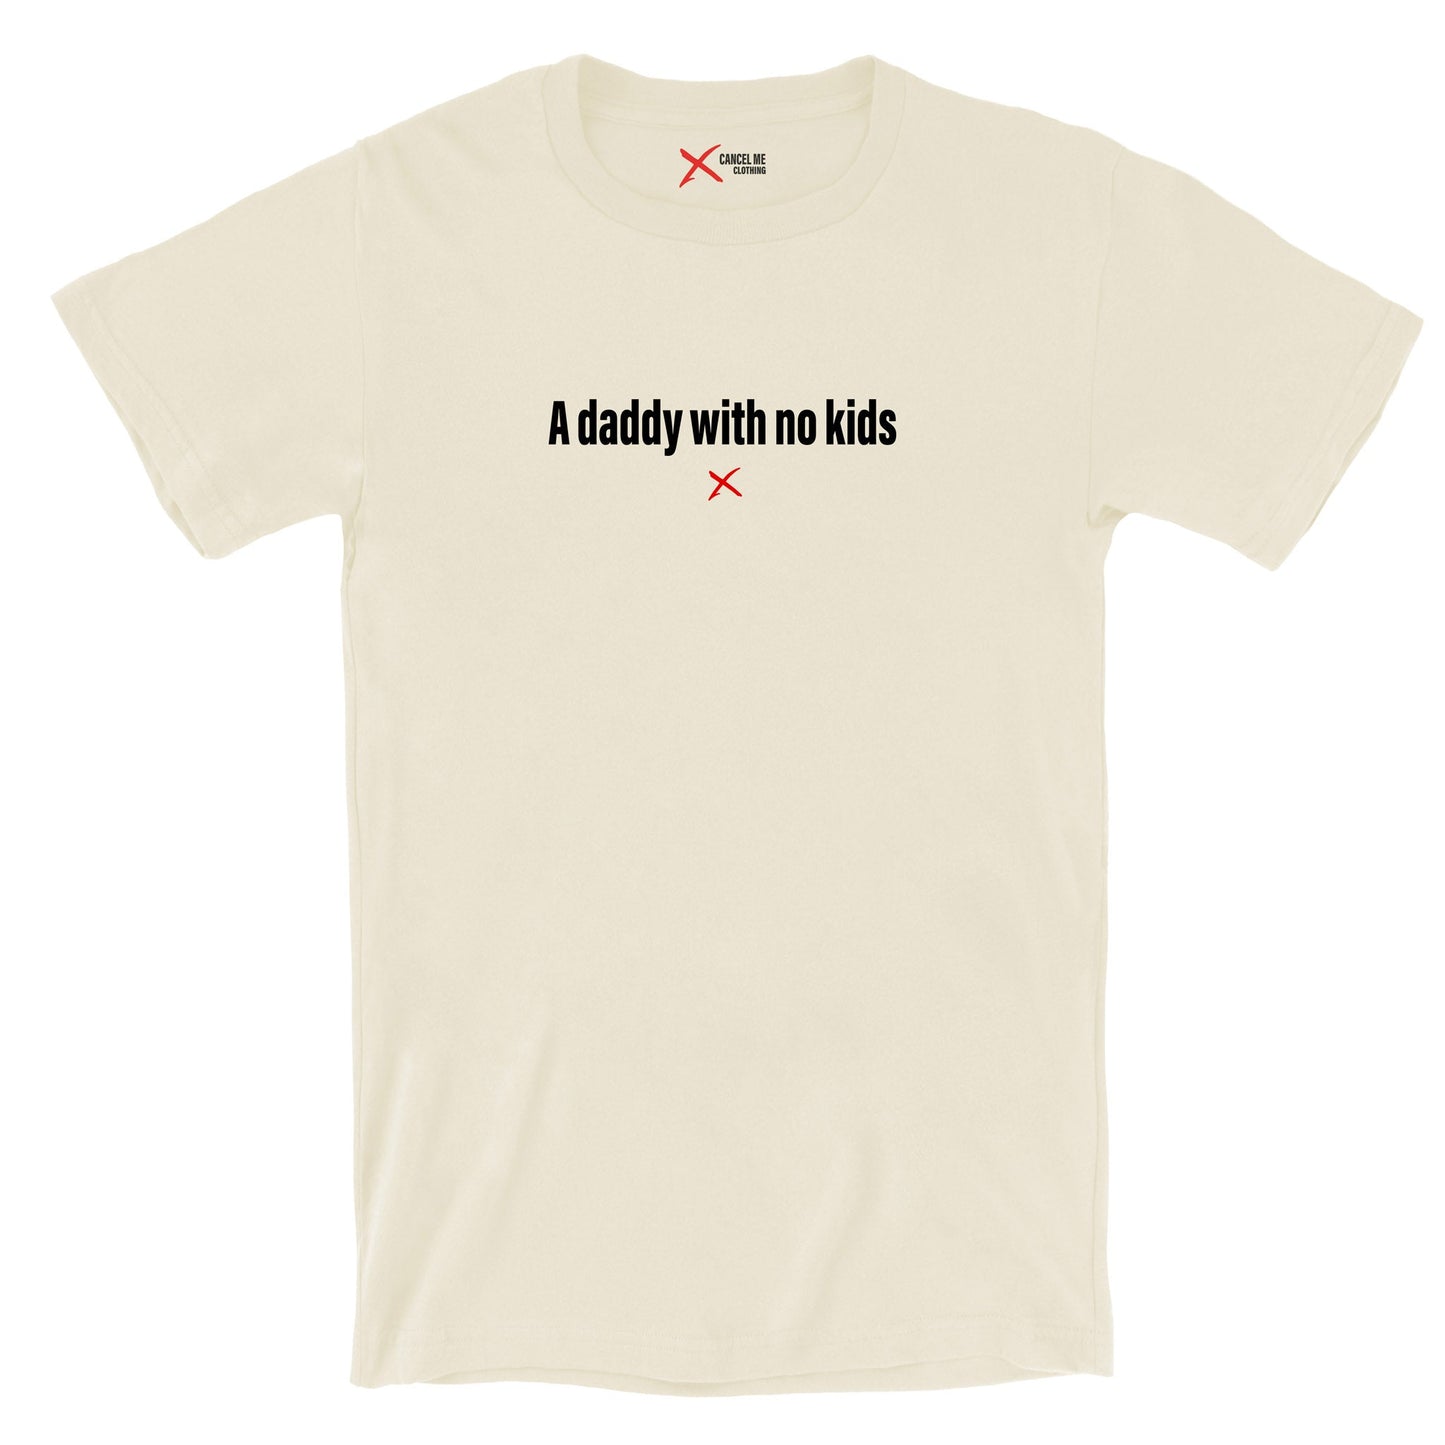 A daddy with no kids - Shirt